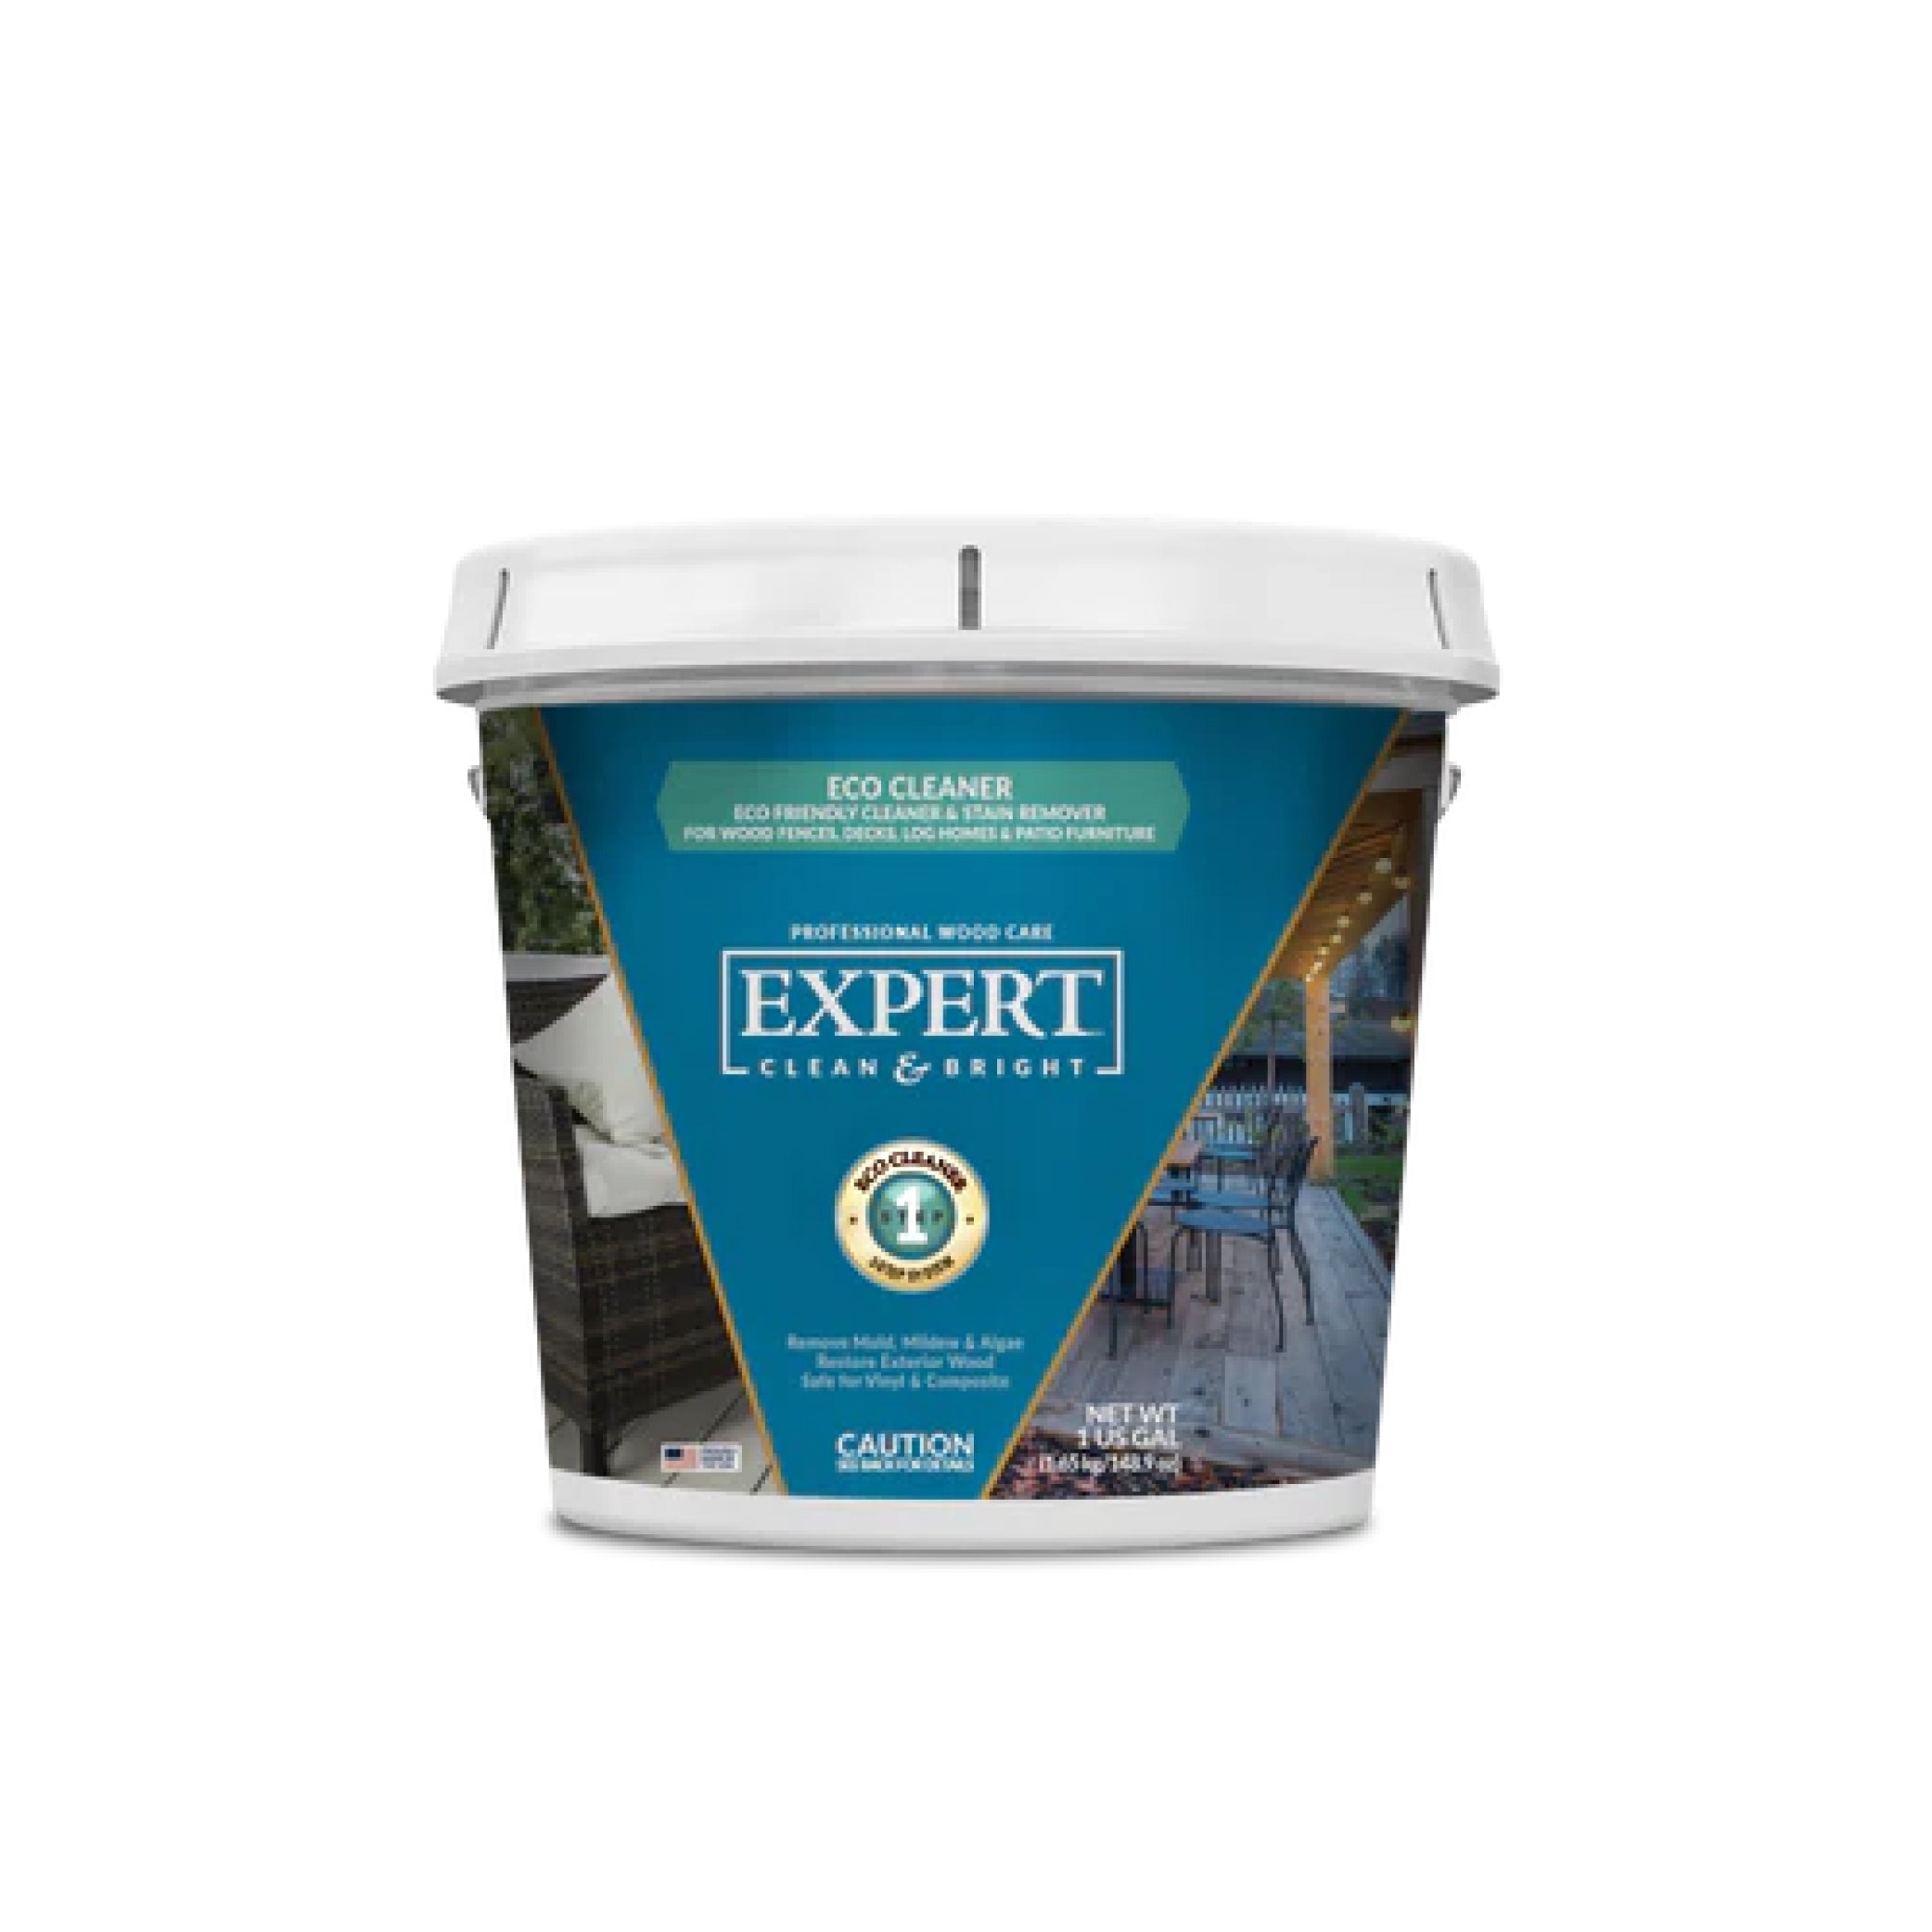 Expert Clean & Bright Eco Cleaner: Oxygenated Wood Bleach Paint Life Supply Co